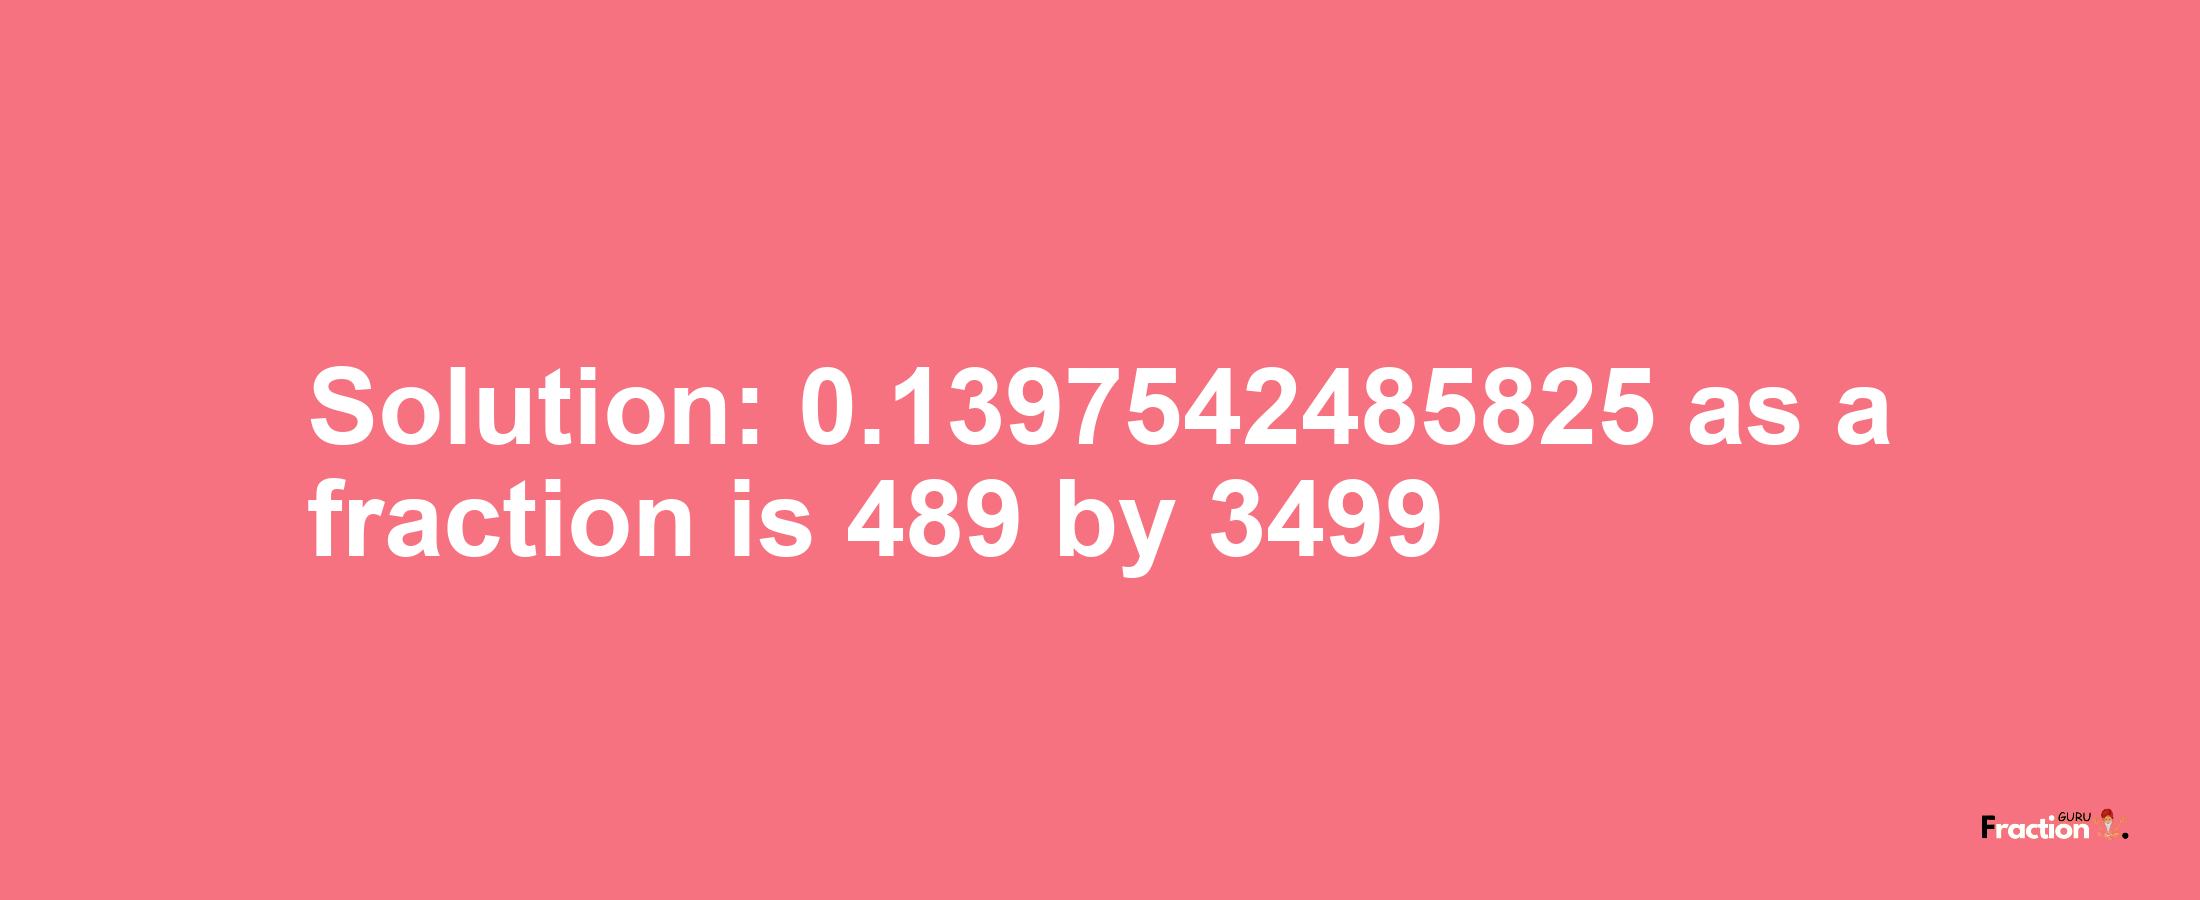 Solution:0.1397542485825 as a fraction is 489/3499